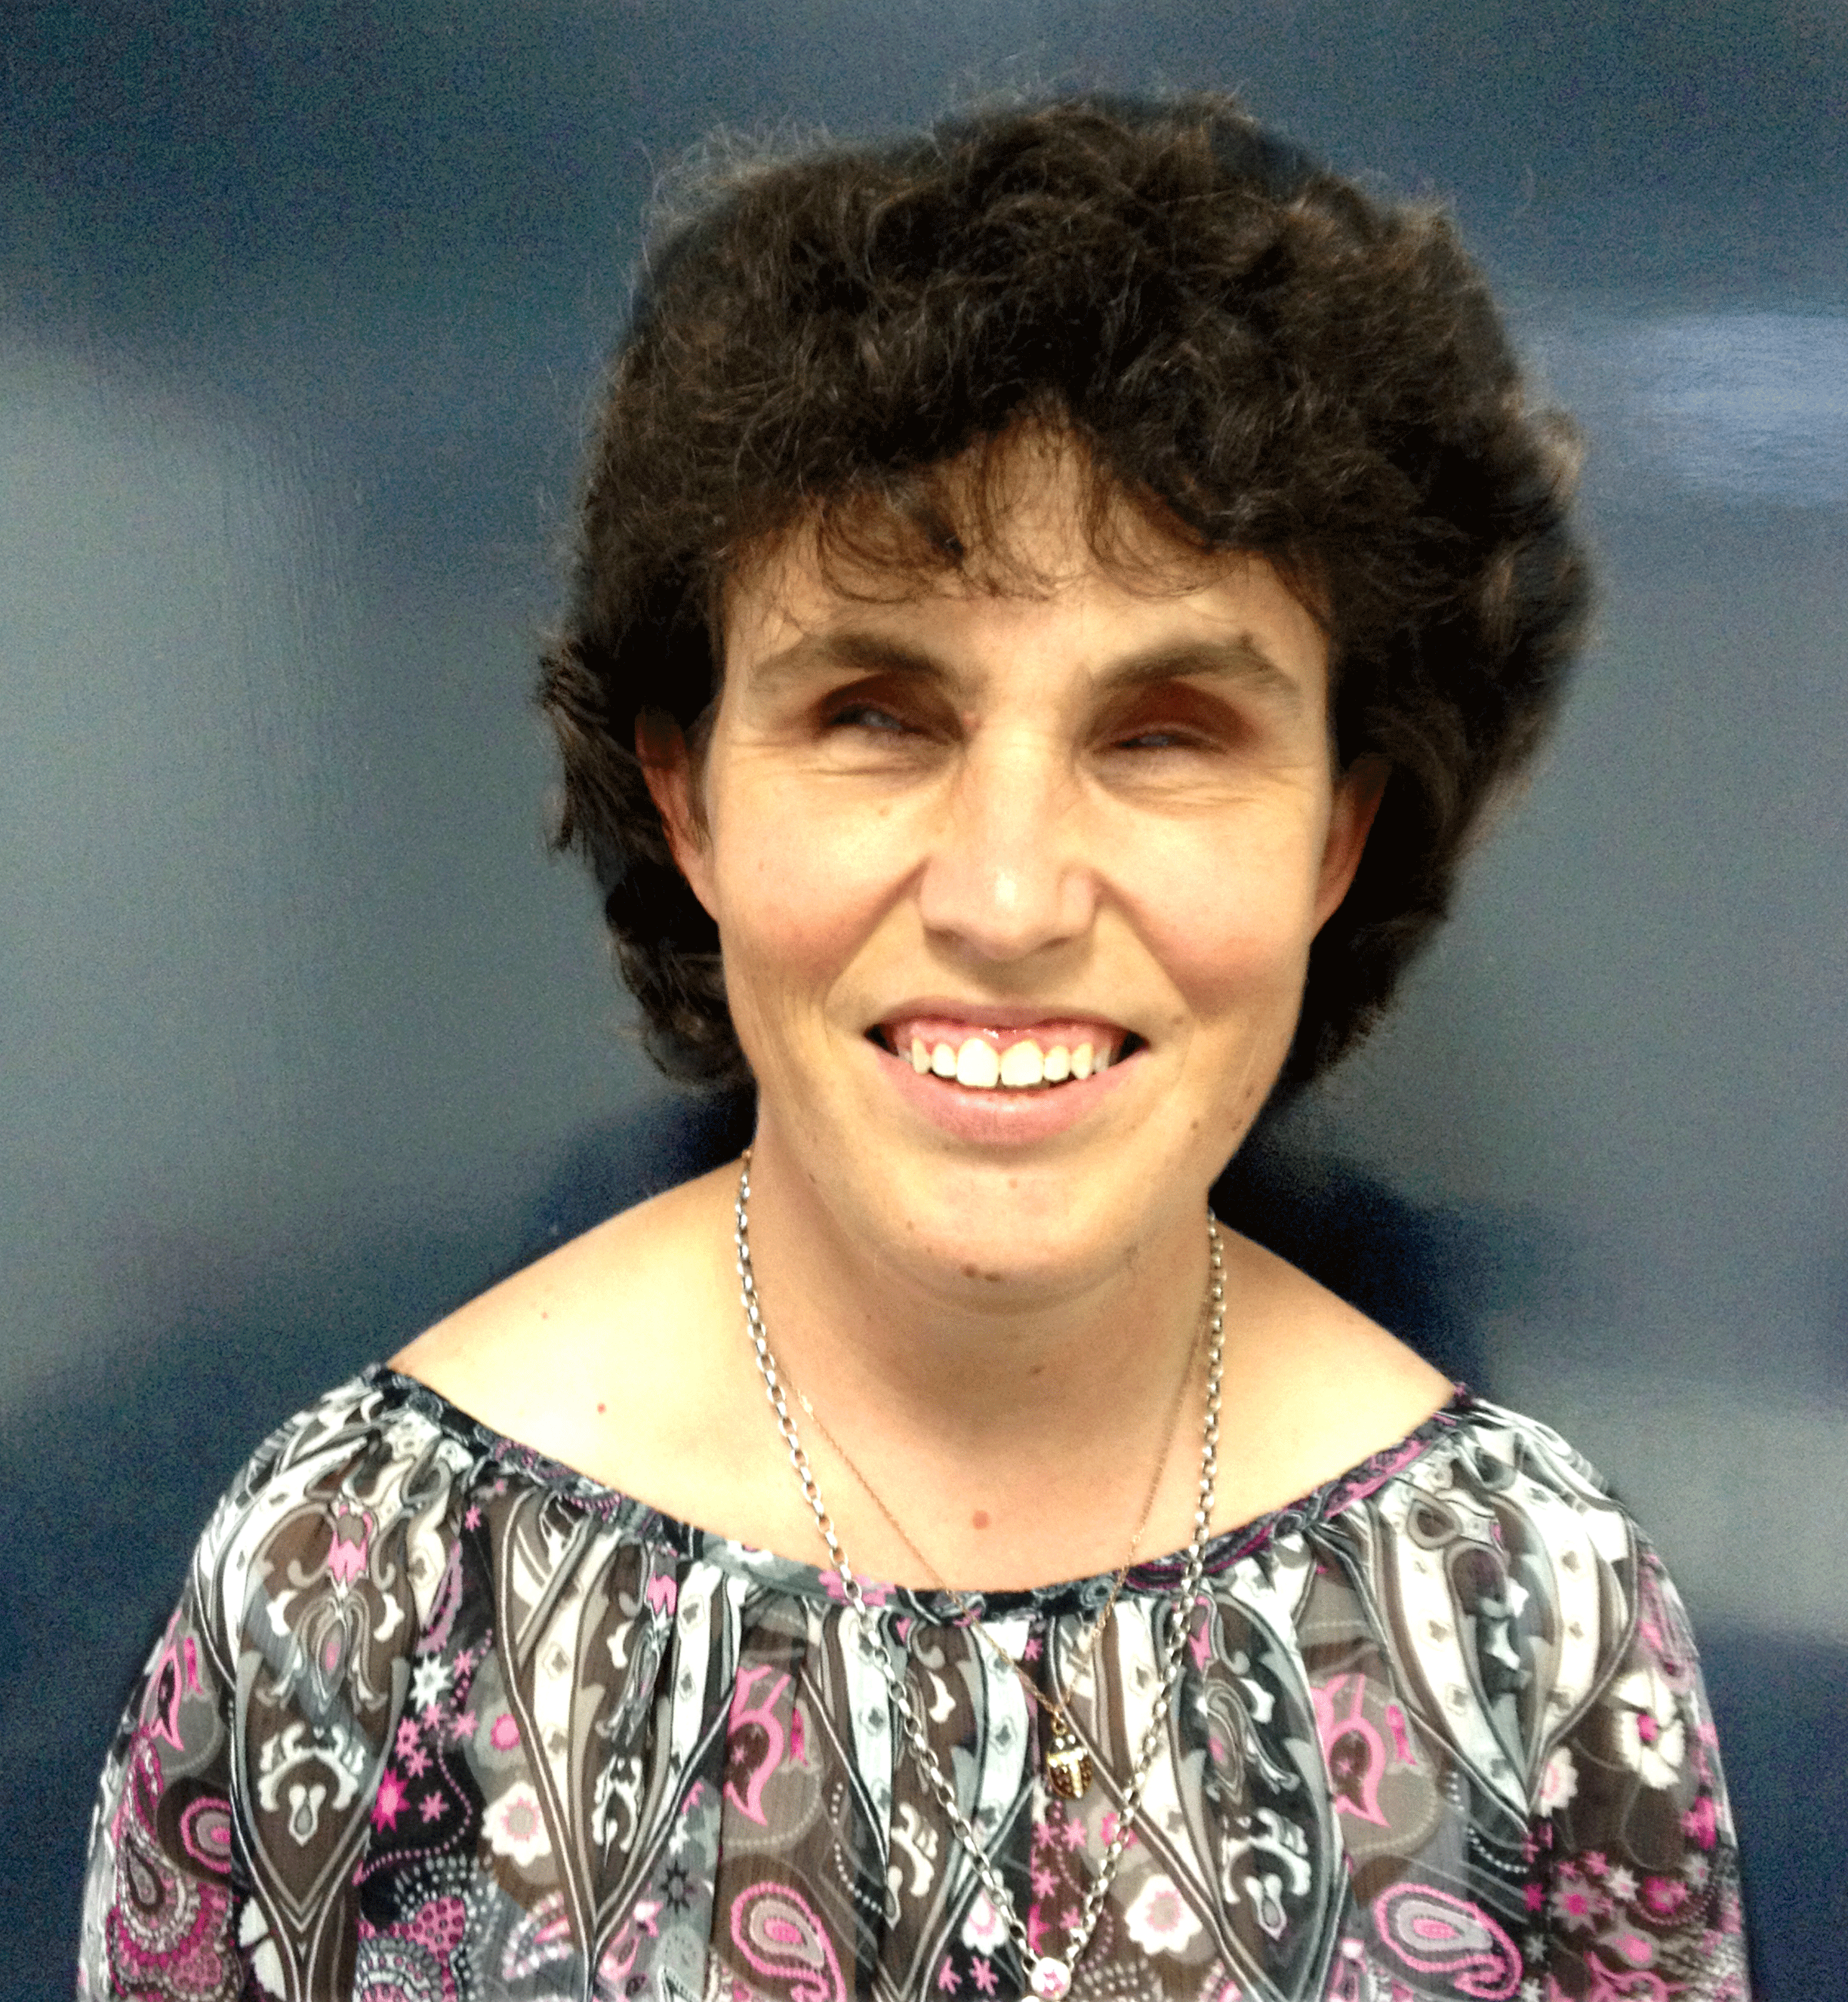 A headshot of a person with short dark curly hair in front of a dark background and smiling at the camera. 